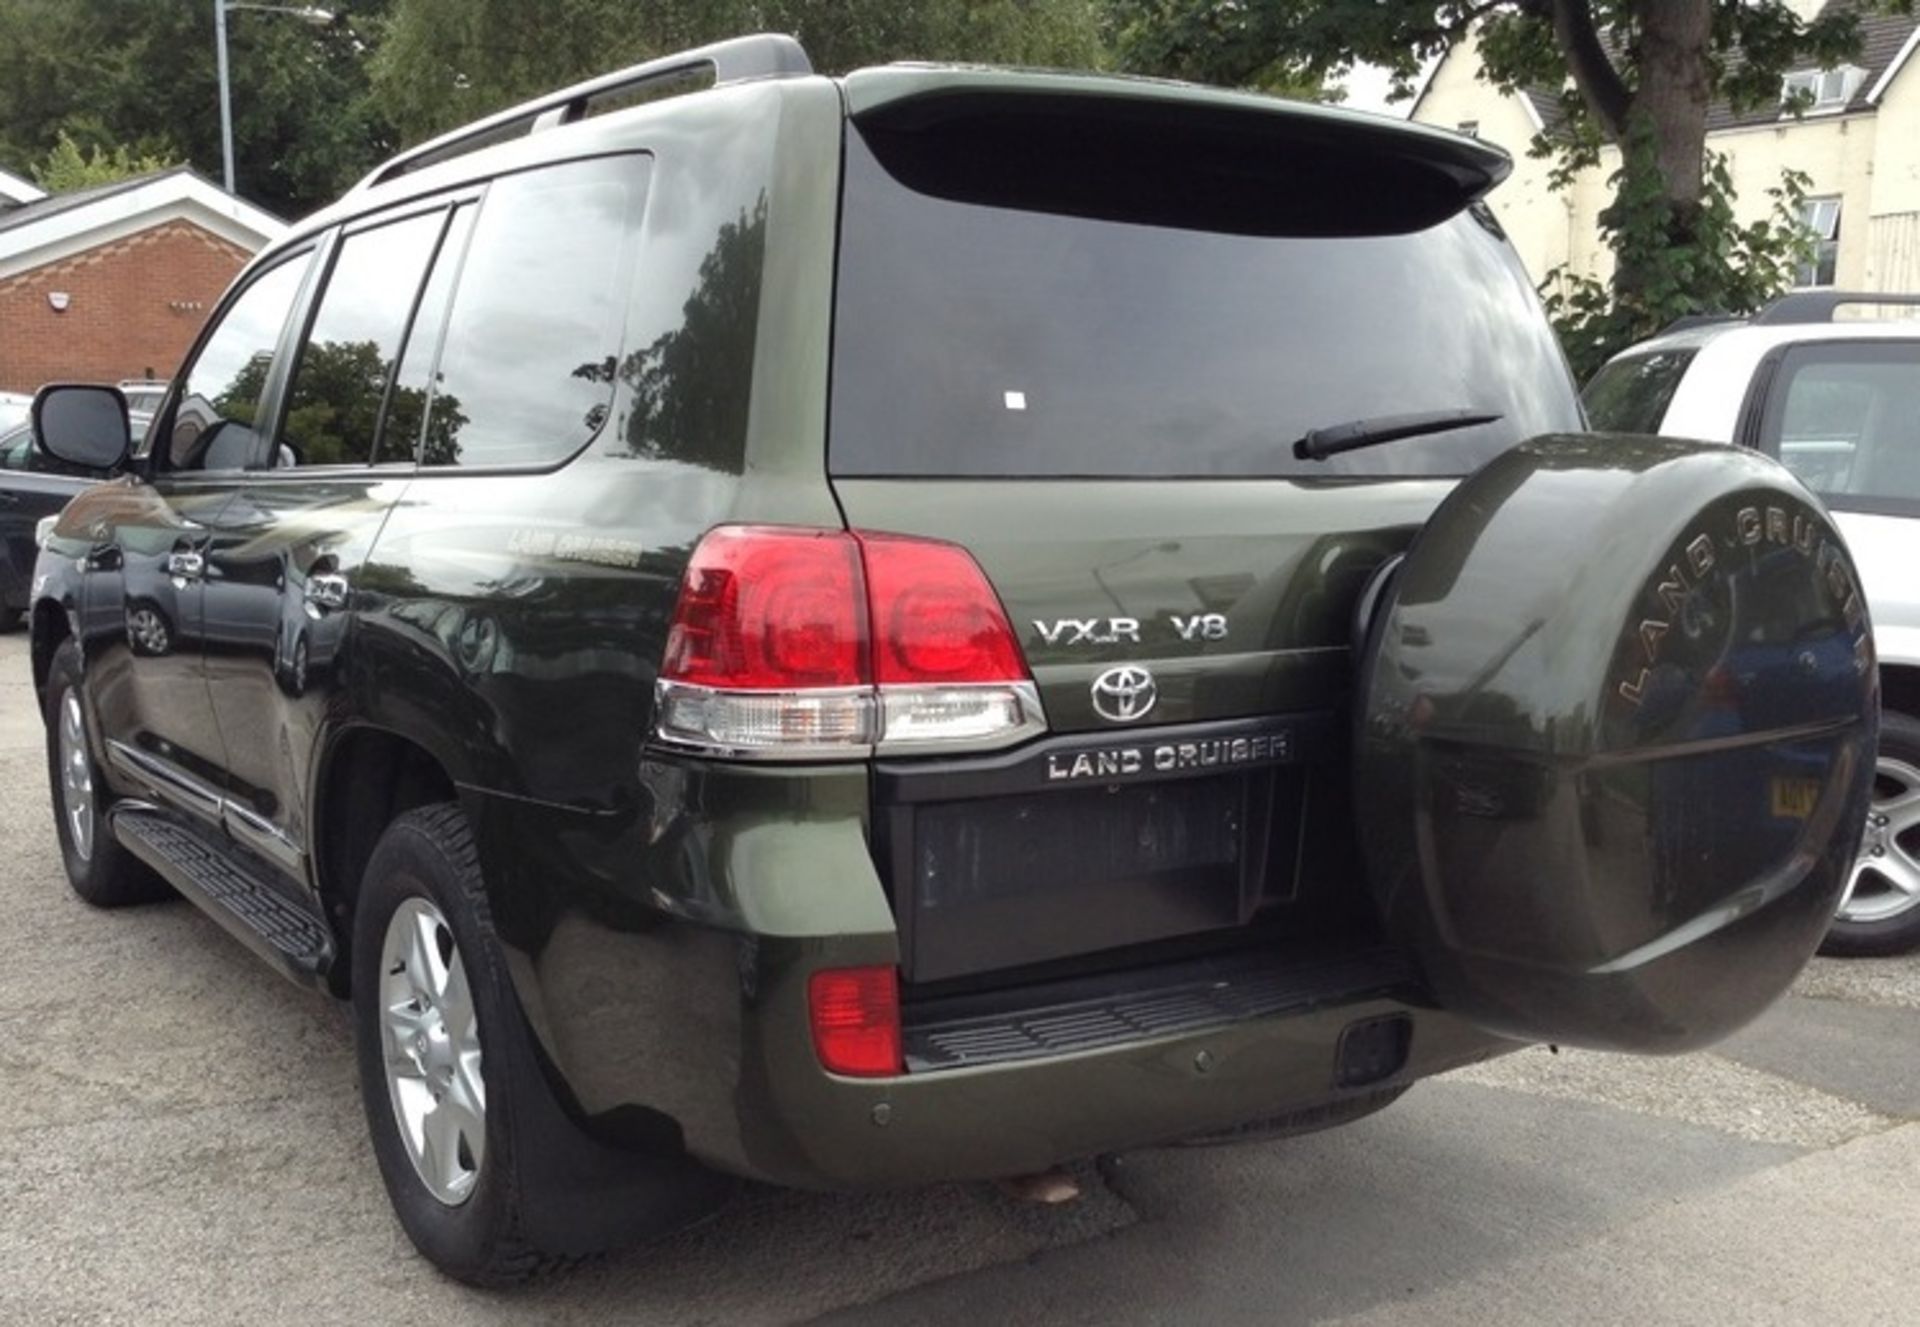 1 x Toyota Land Cruiser Amazon V8 VX-R 4.7 Petrol - Year 2010 - Left Hand Drive - Middle Eastern - Image 3 of 15